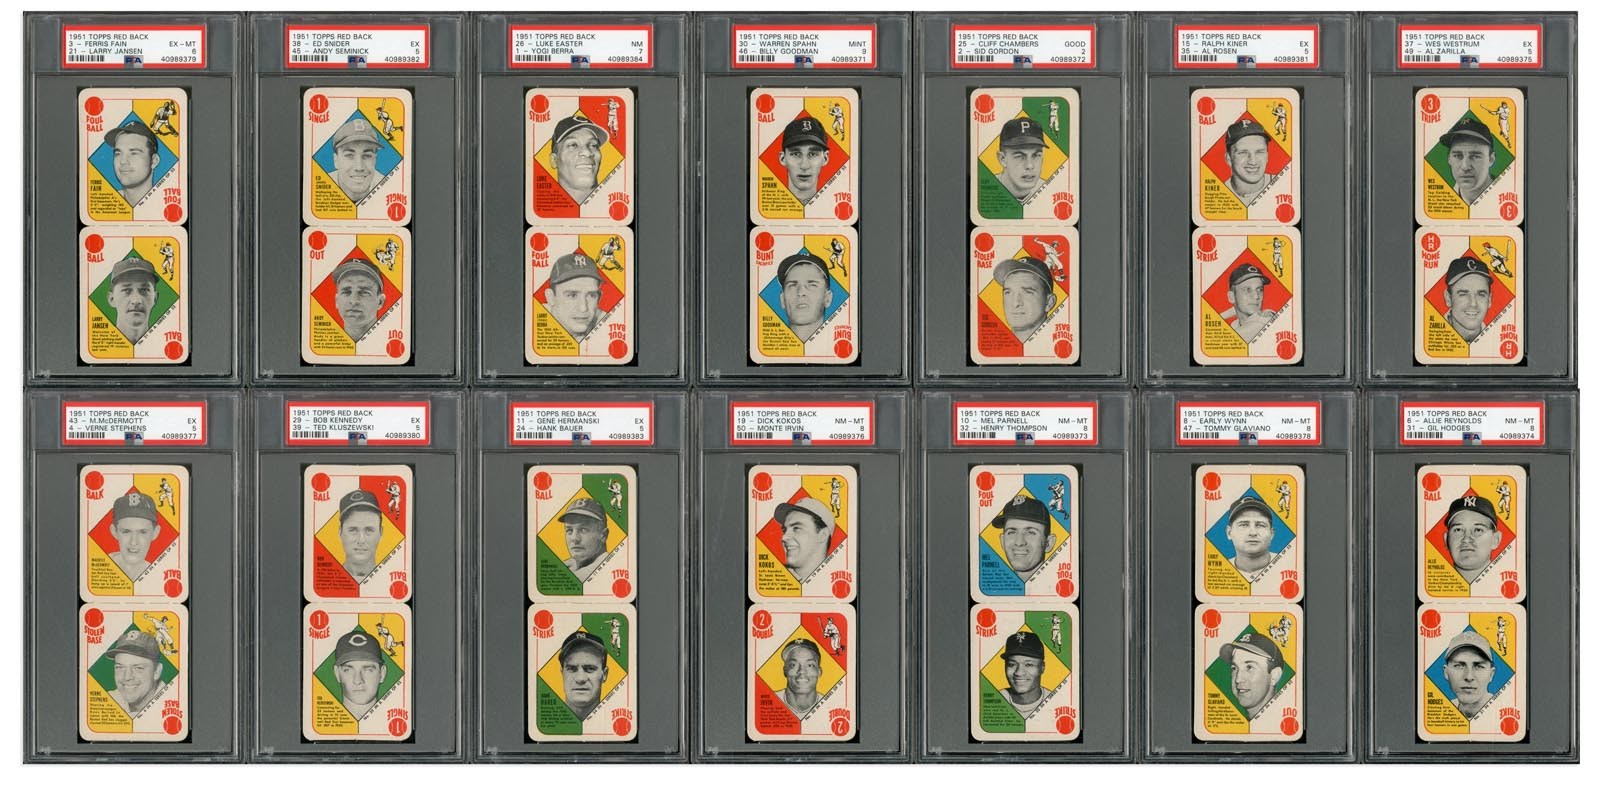 Baseball and Trading Cards - High Grade 1951 Topps Red Back Panels PSA Graded Partial Set - #7 on PSA Registry